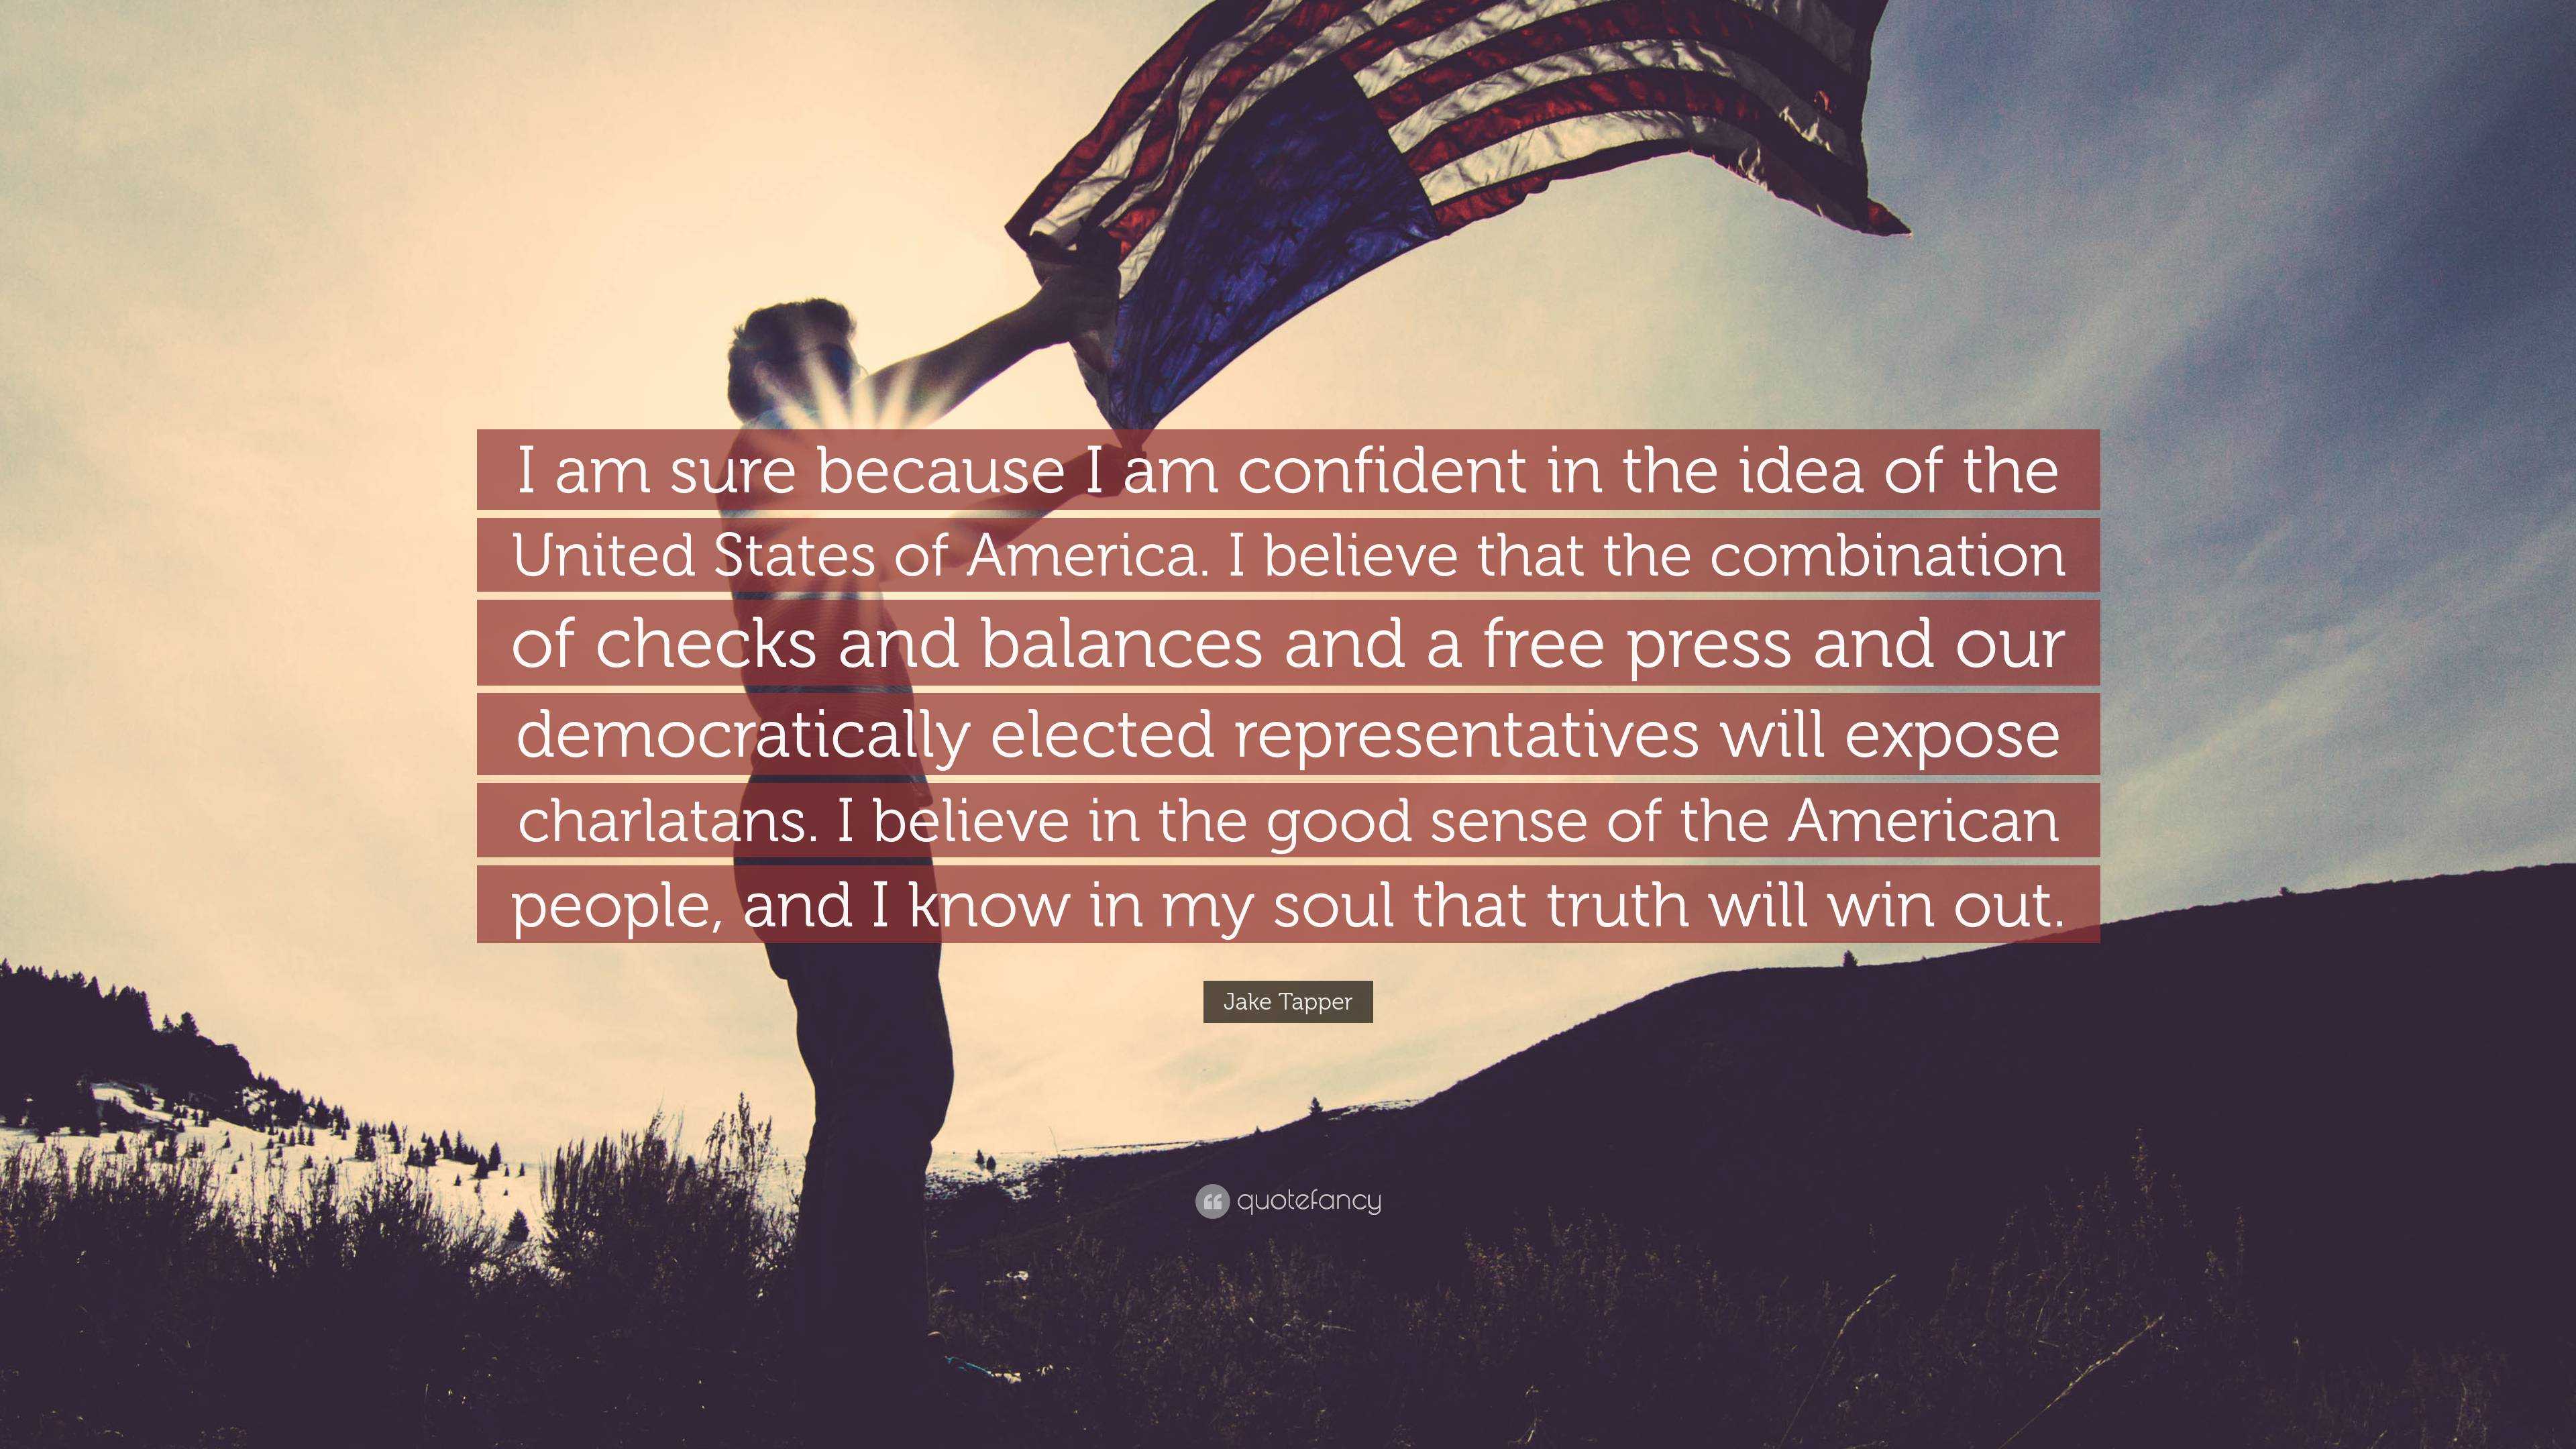 Jake Tapper Quote: “I am sure because I am confident in the idea of the  United States of America. I believe that the combination of checks a...”